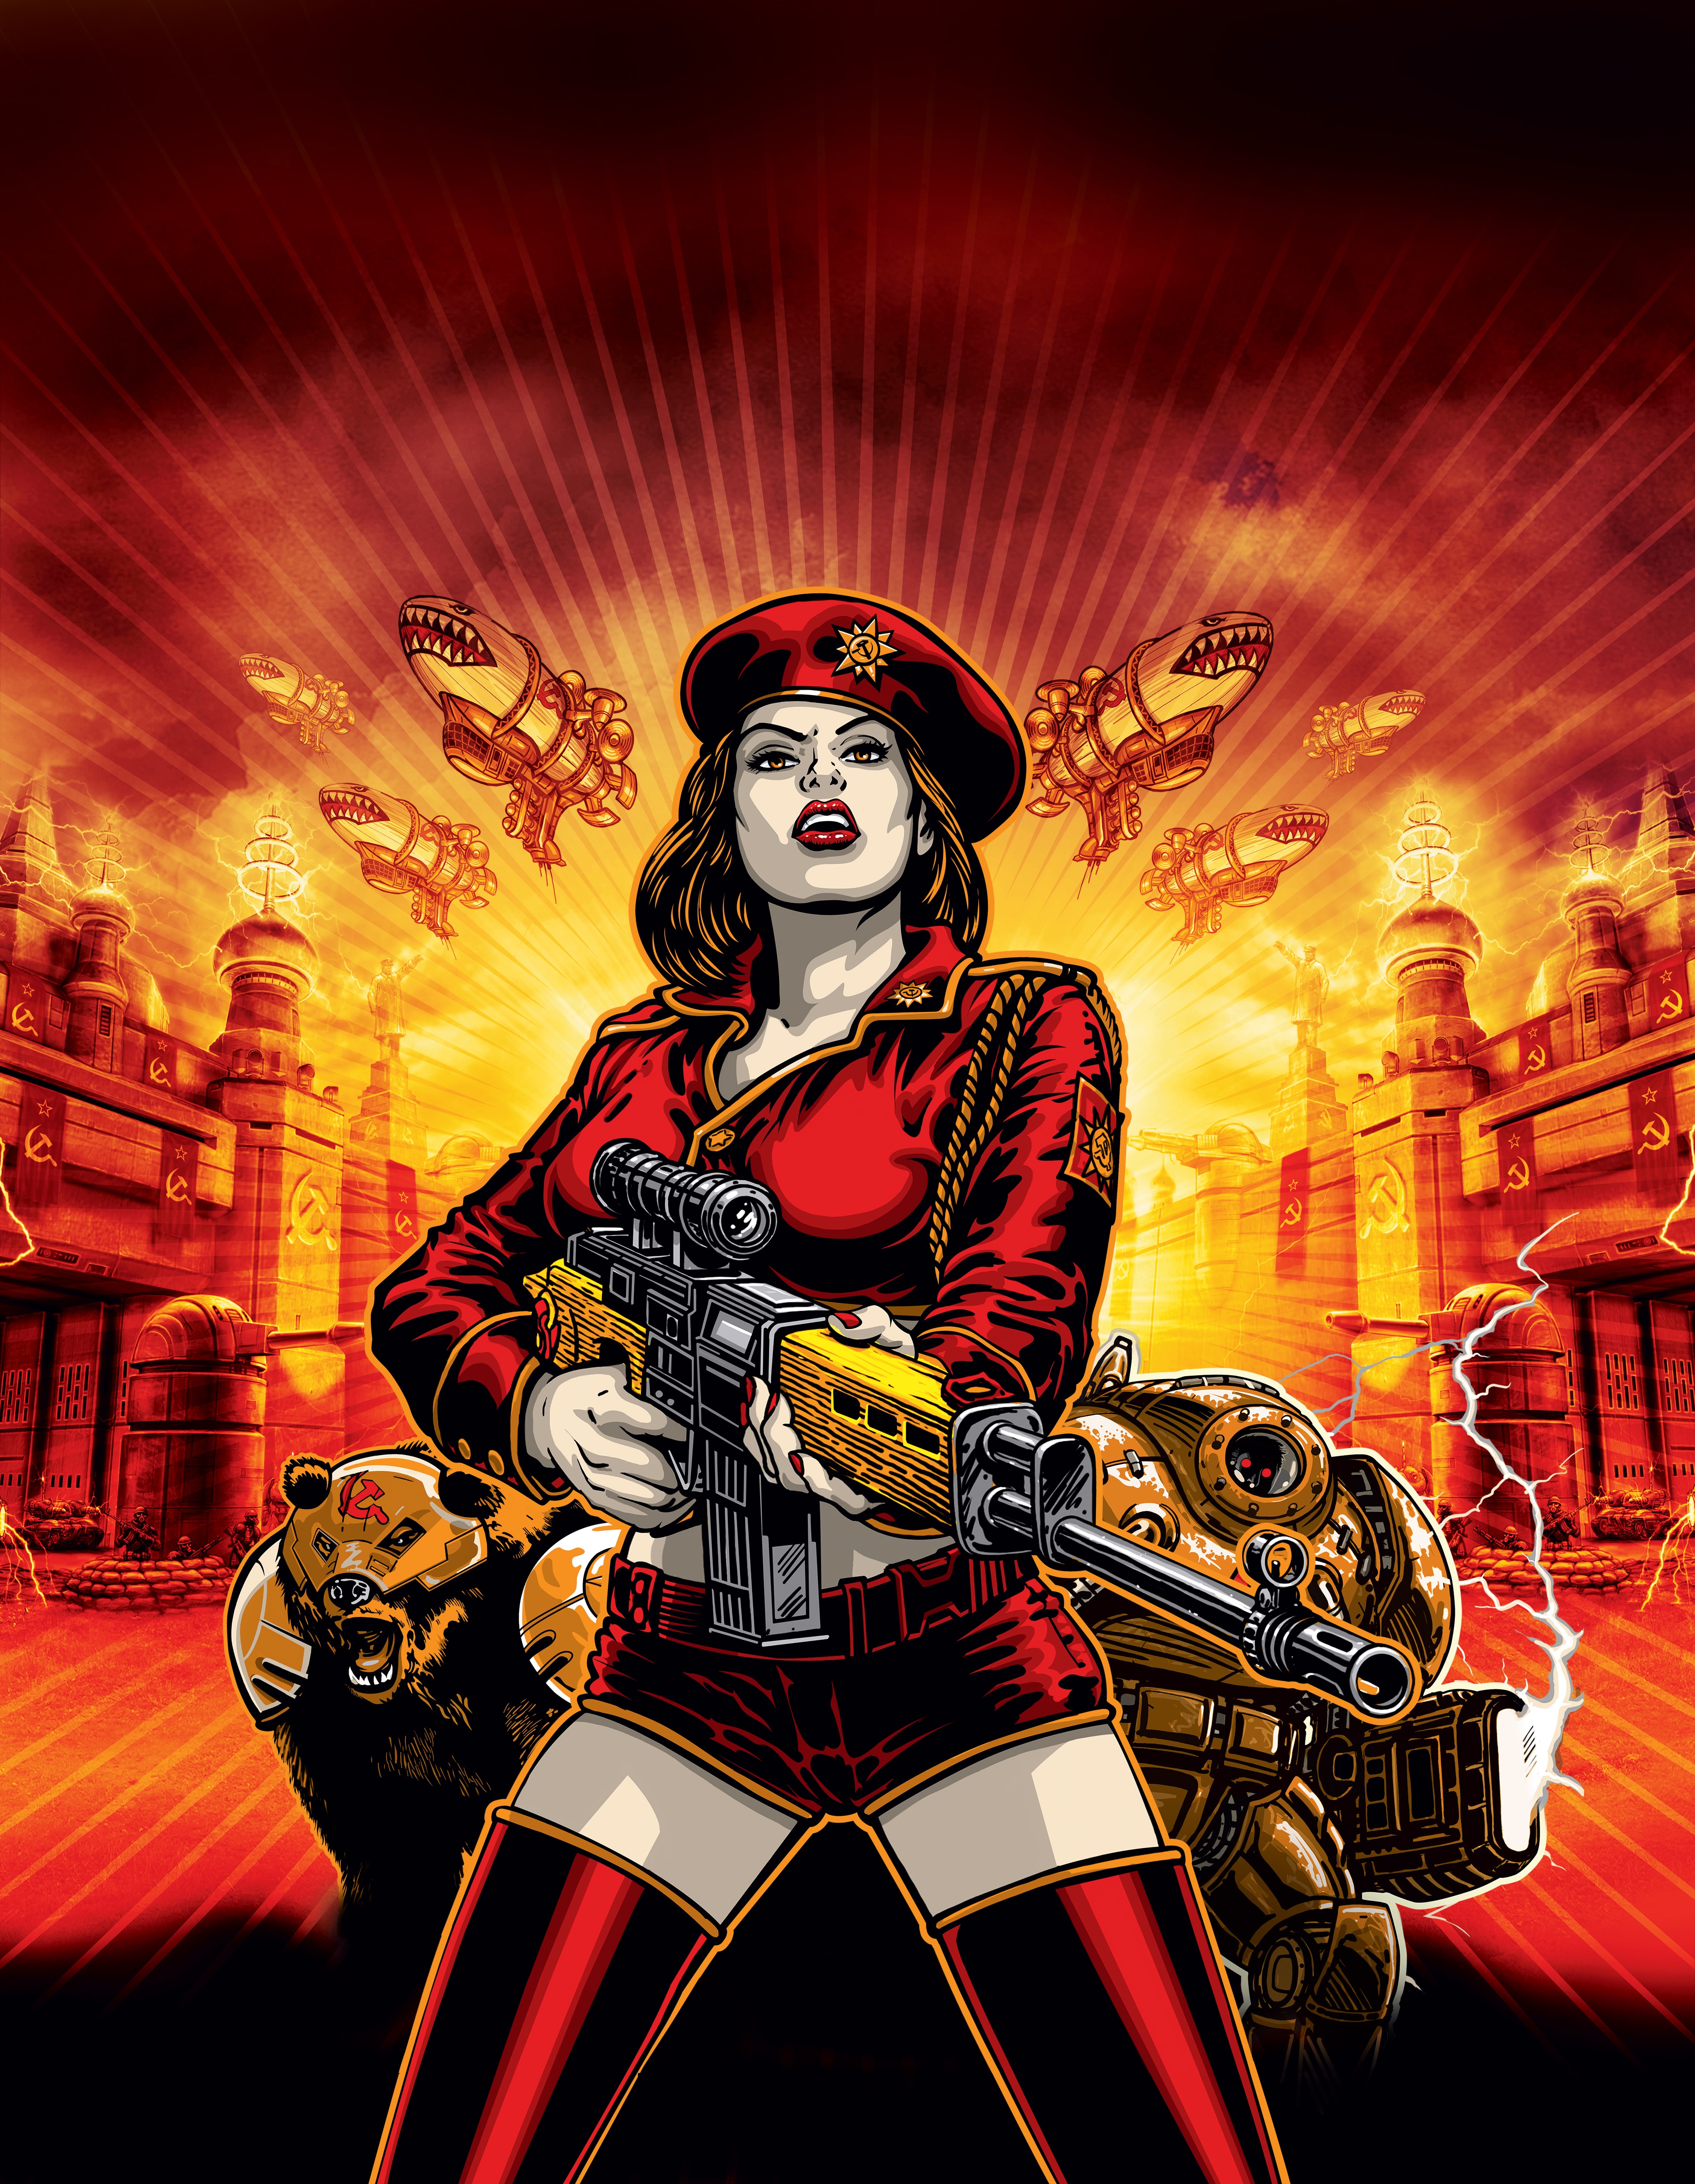 command and conquer red alert 3 xbox 360